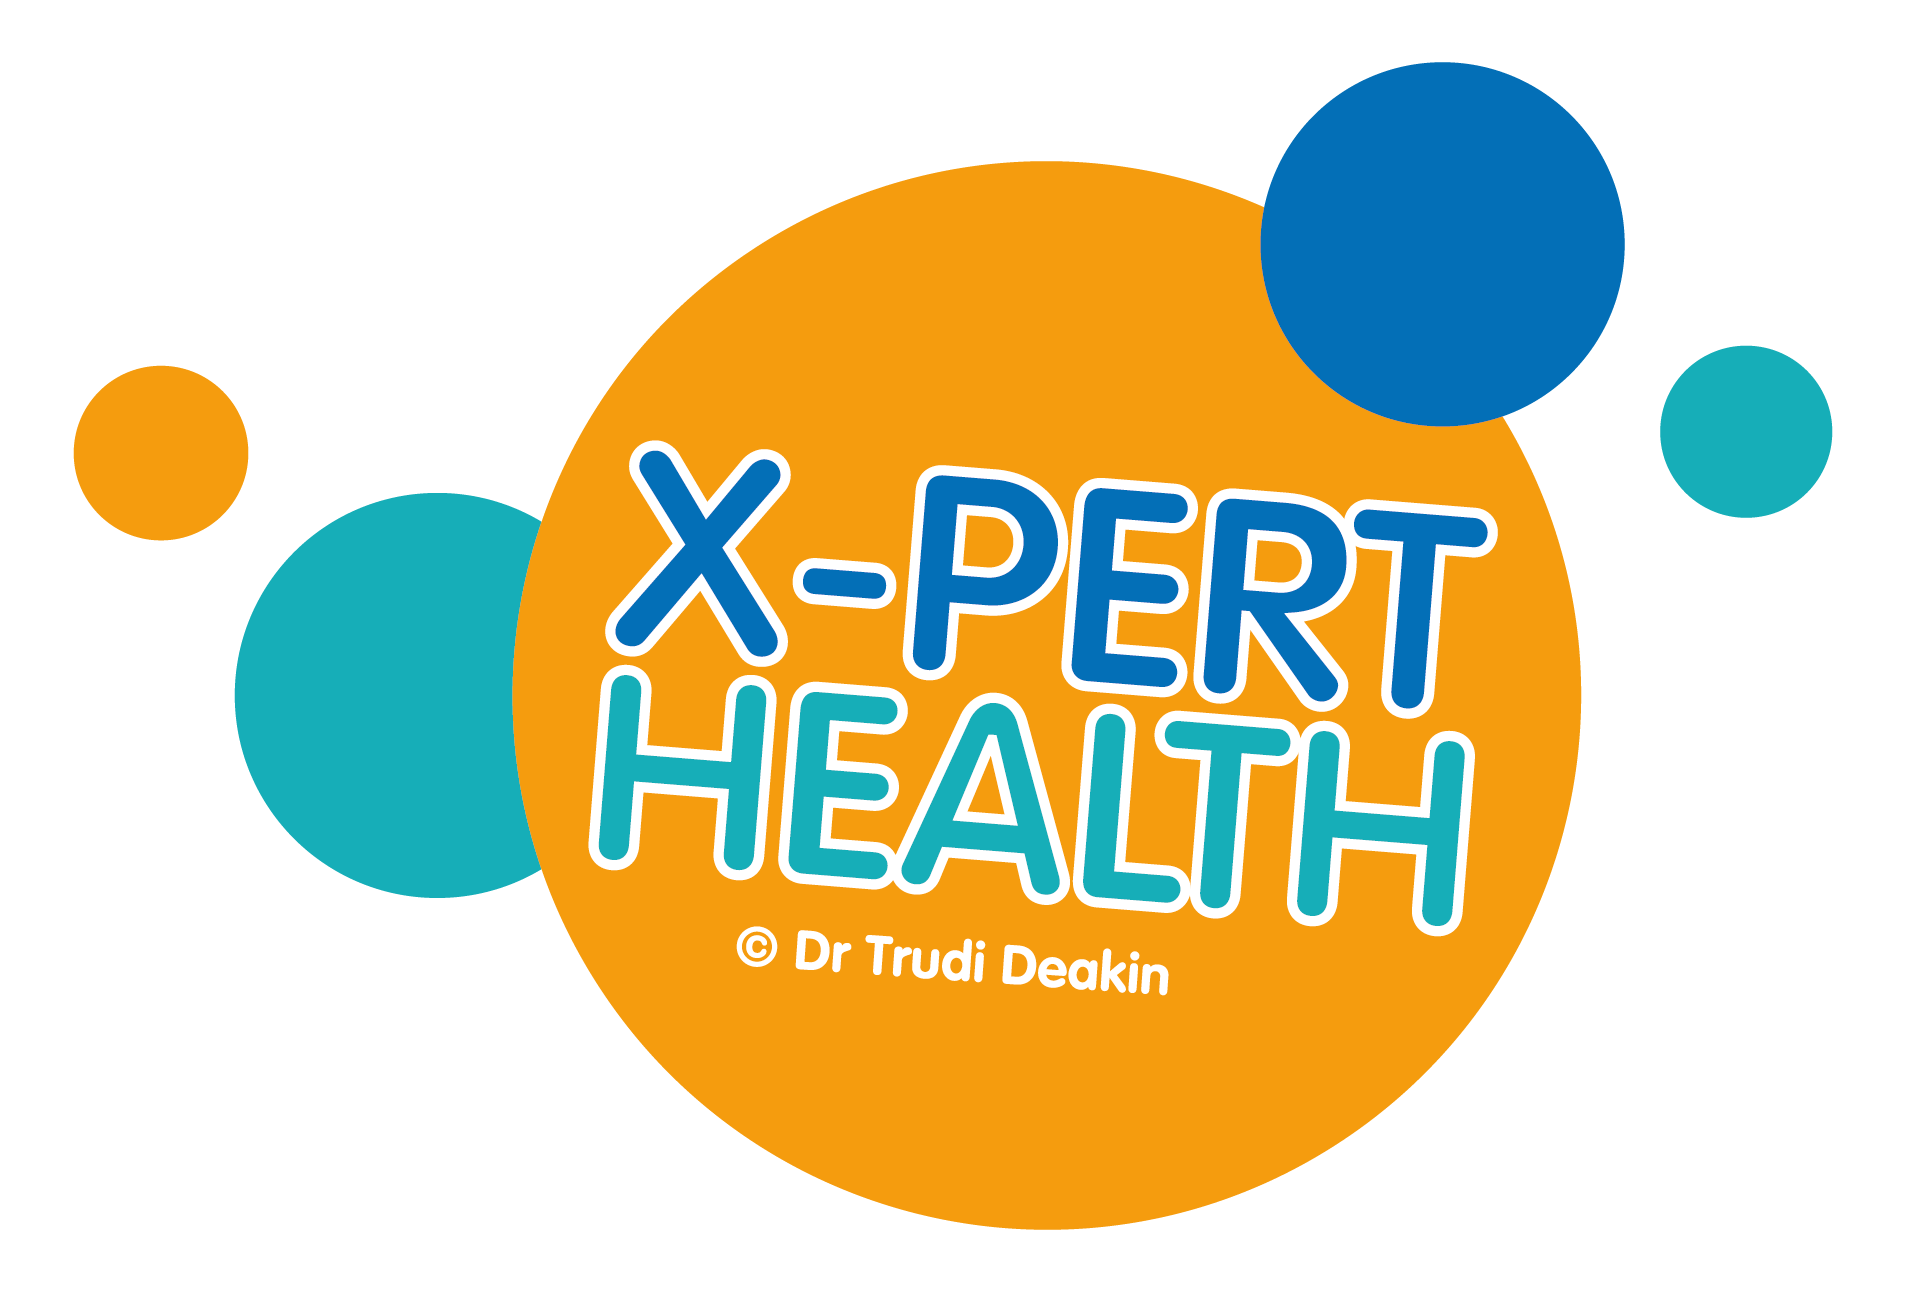 X-PERT Health Diabetes Education and Weight Loss Programmes